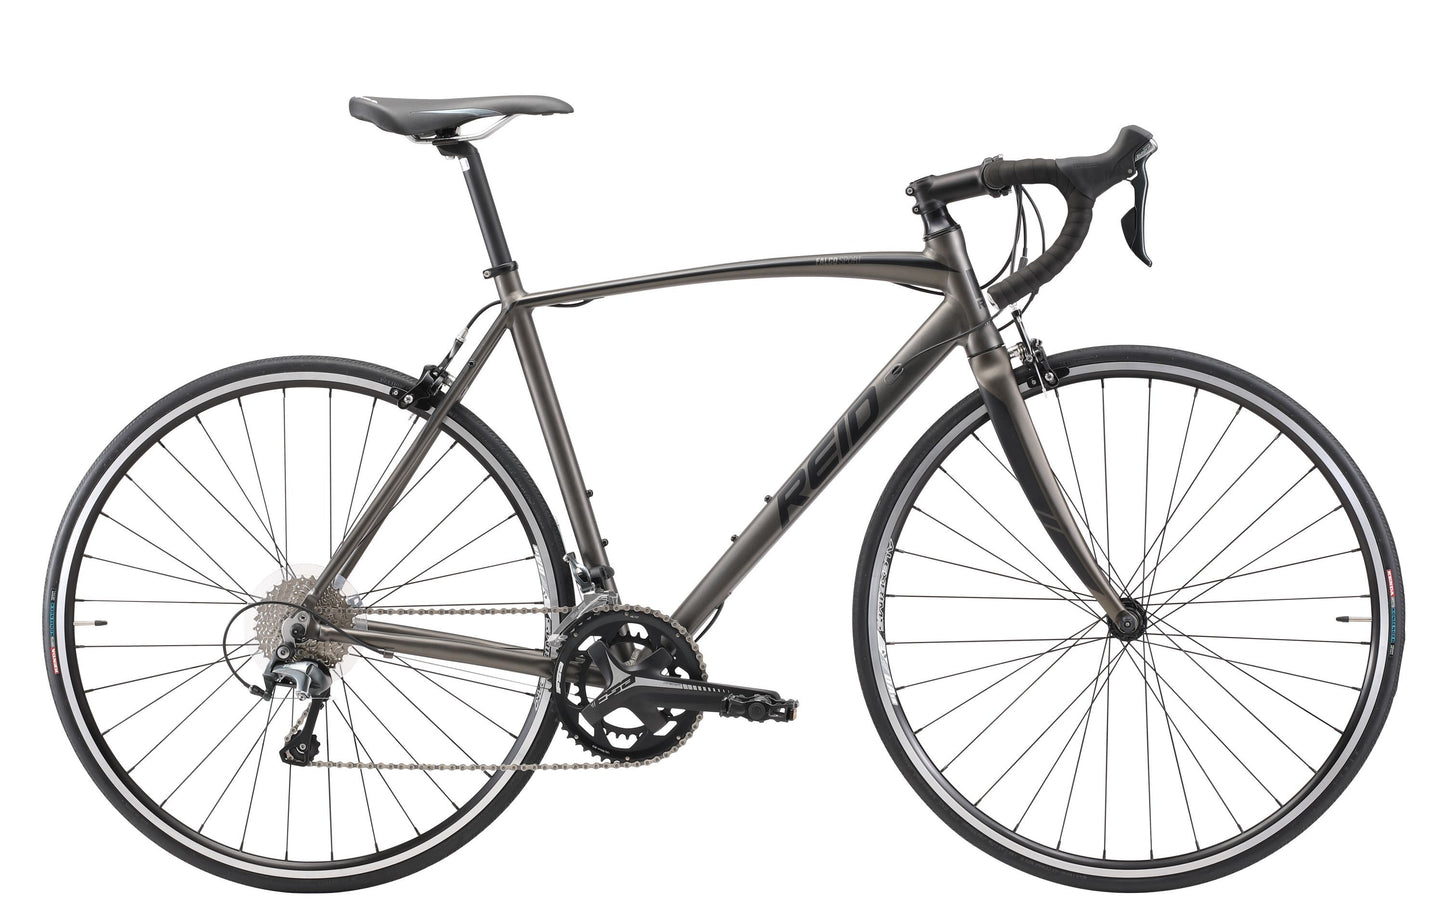 Falco Sport Road Bike in Charcoal with Shimano 10-speed gearing from Reid Cycles Australia